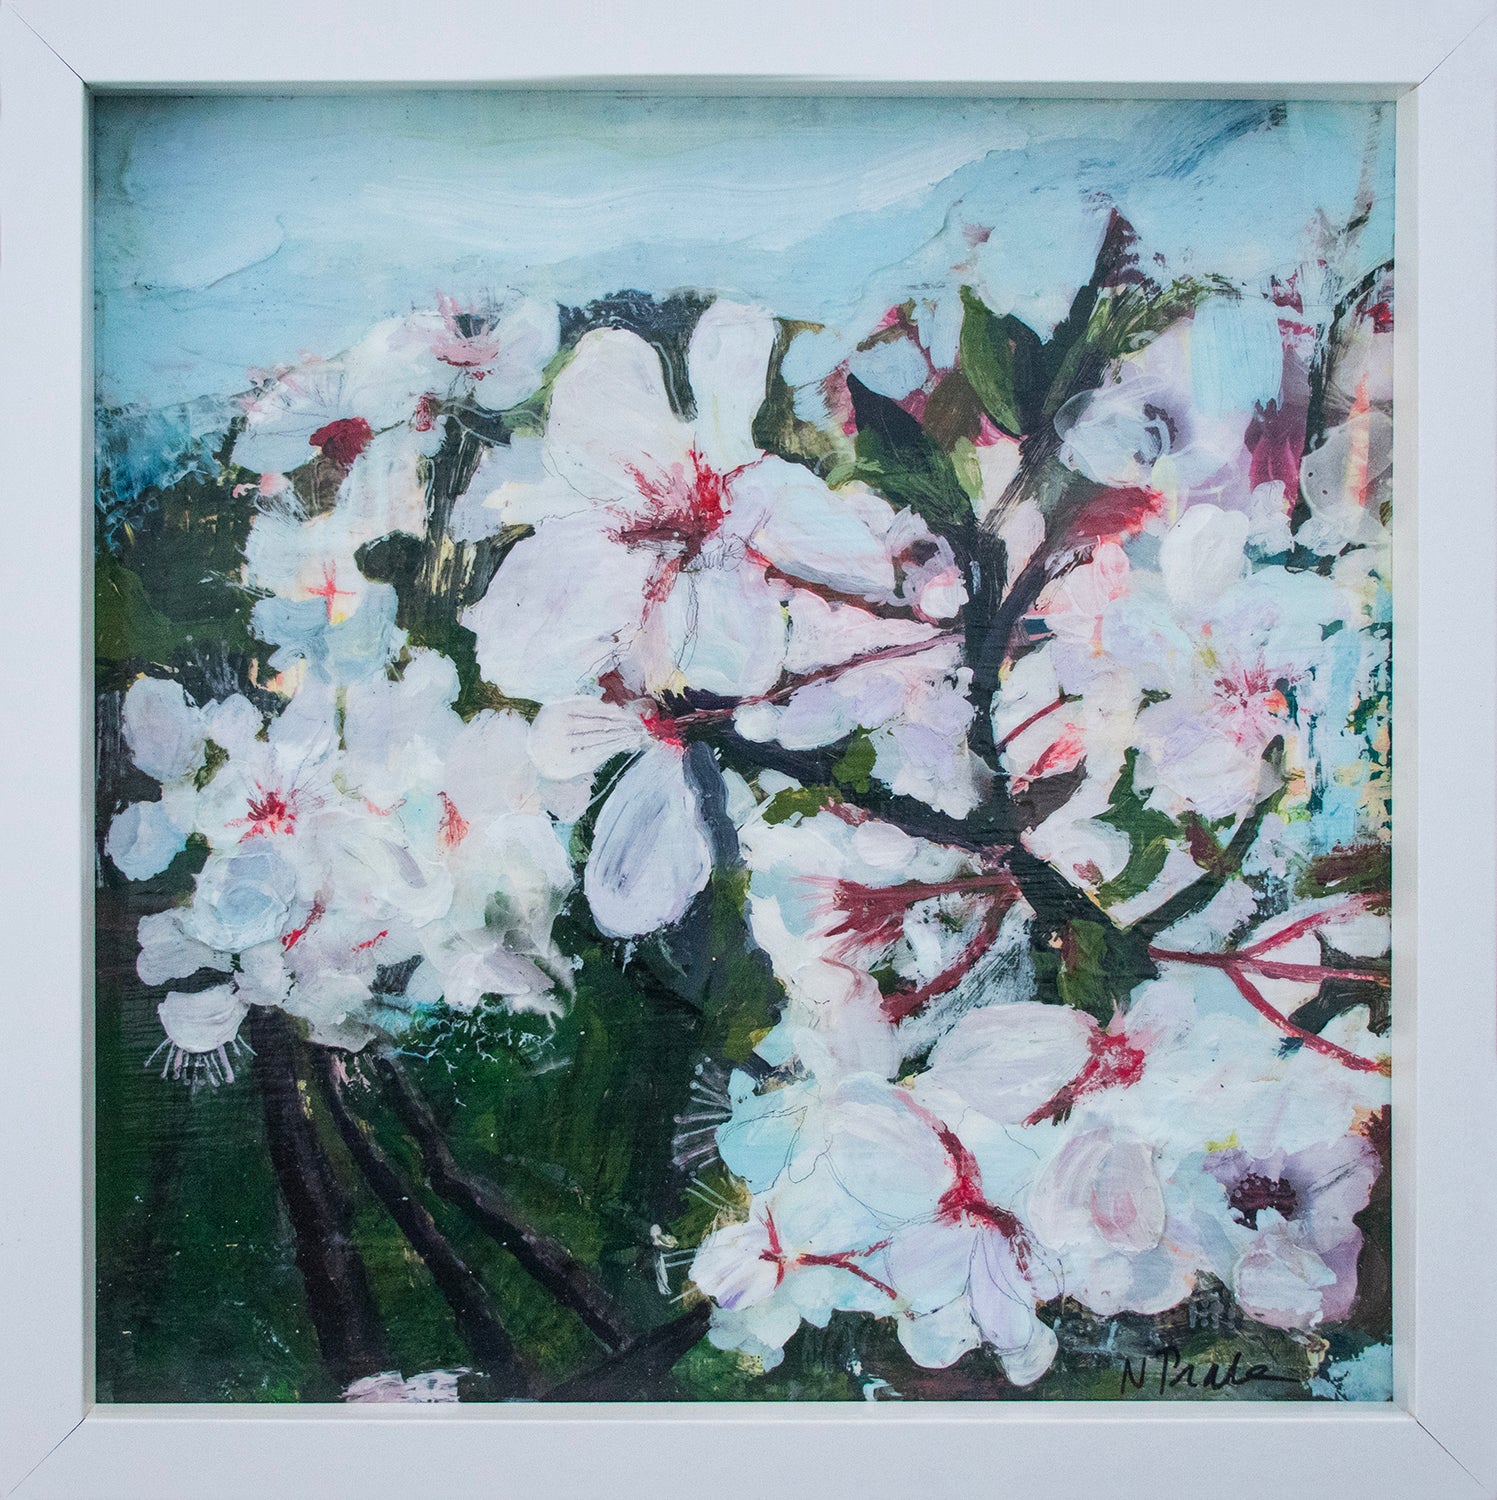 A lively and expressive painting of wild plum blossoms. The petals are shades of white and delicate pinks and lavender. There are bright red centres inside the blossoms. It exudes the joy and energy of springtime.